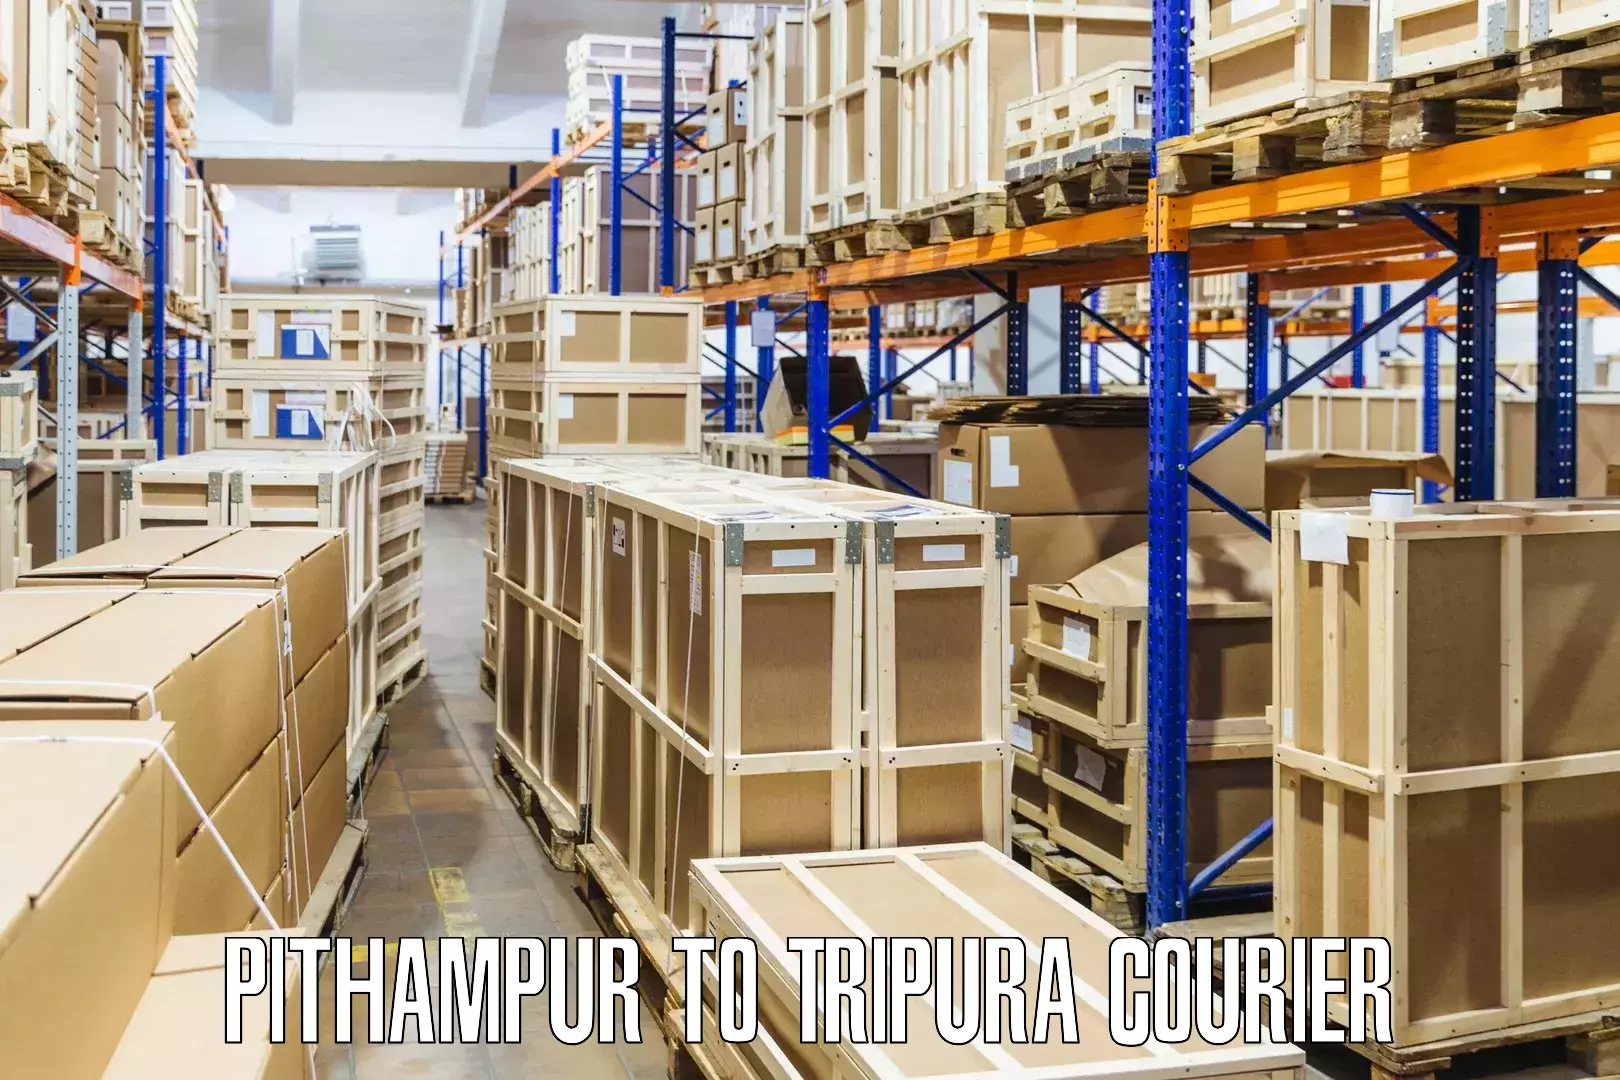 Nationwide parcel services Pithampur to Tripura